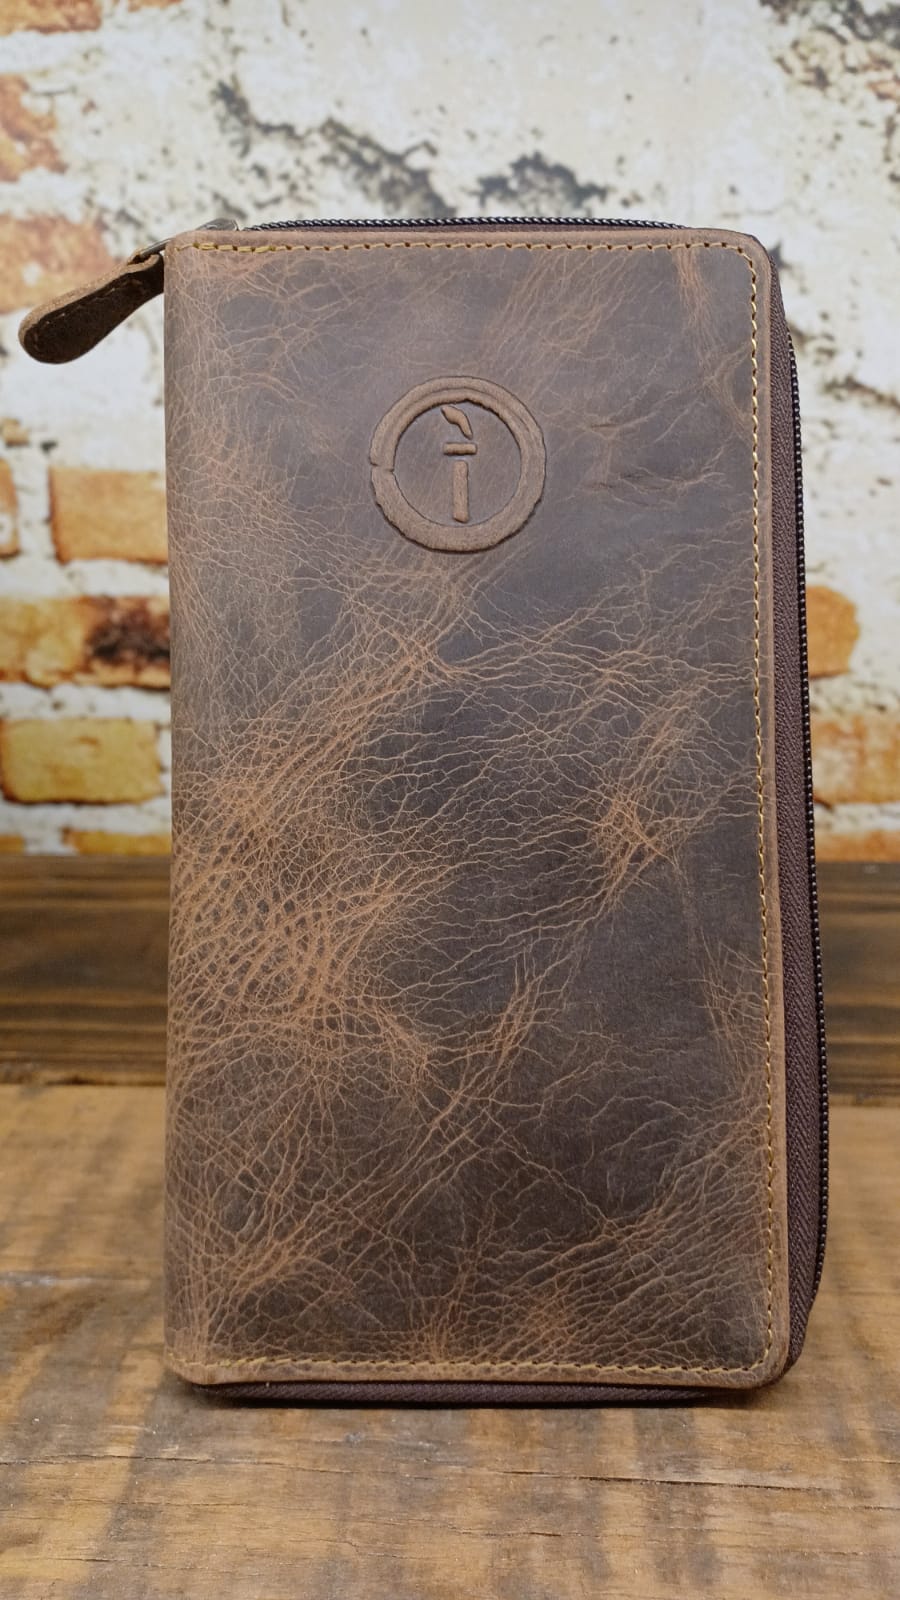 Zipped Travel leather Wallet